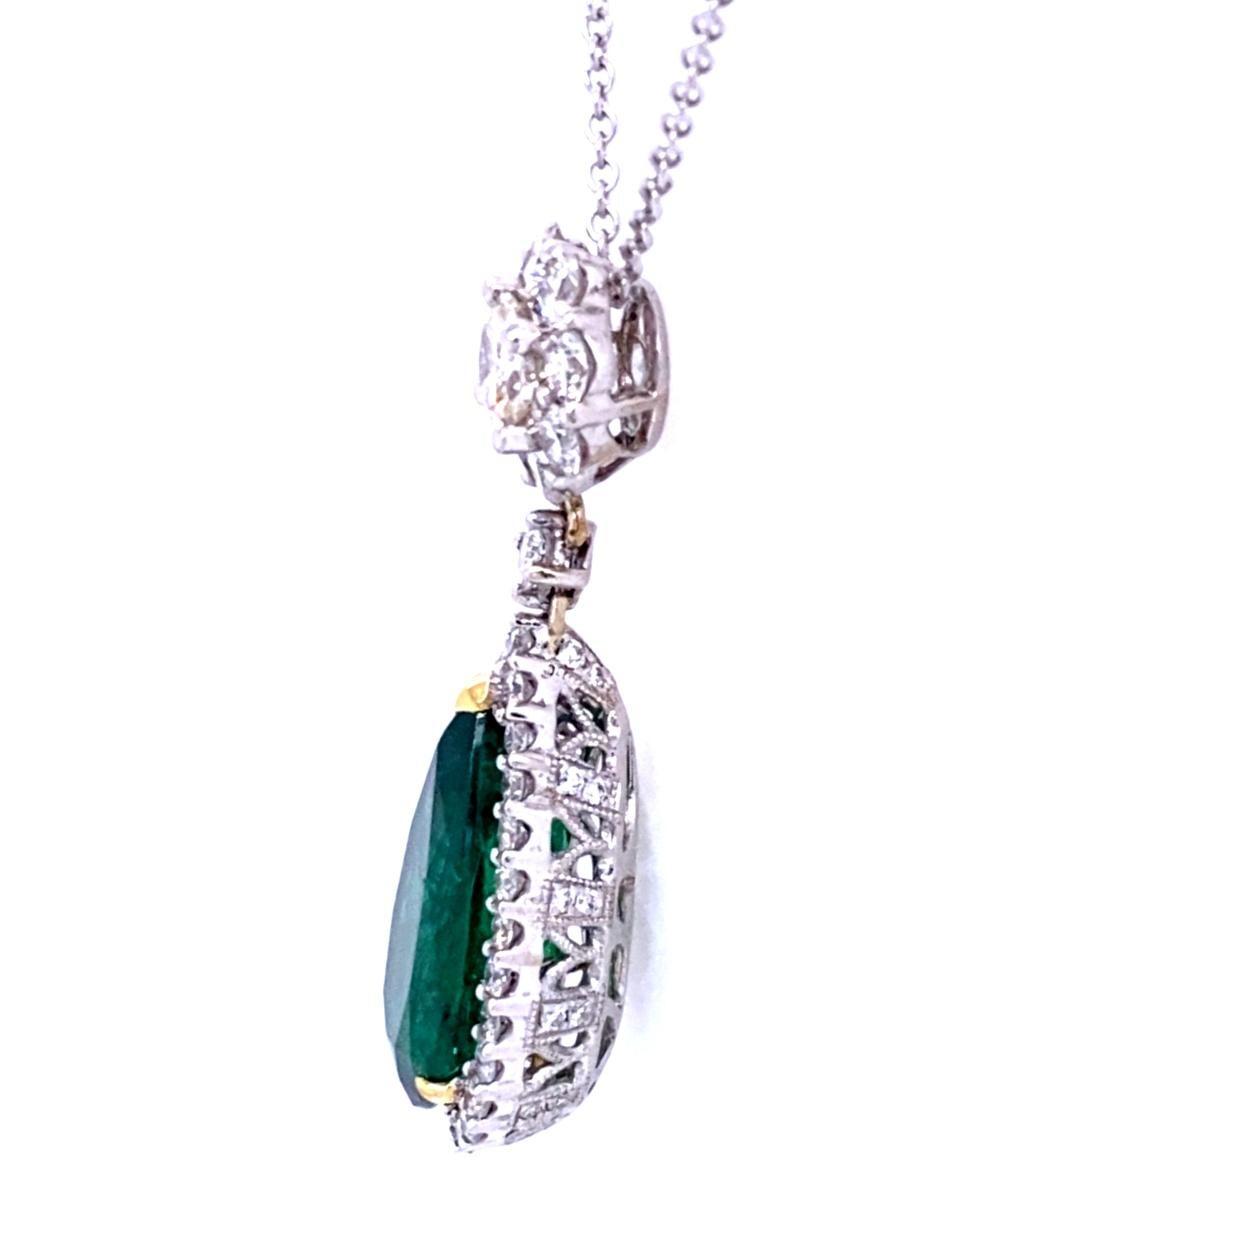 This beautiful 18K Pear Shaped Pendant features a pear shape Emeralds (7.00 Ct) accented by 1.85 Ct of round brilliant diamonds. Look at the back of the earring for the gallery and migraine work to realize the outstanding Craftsmanship that has been